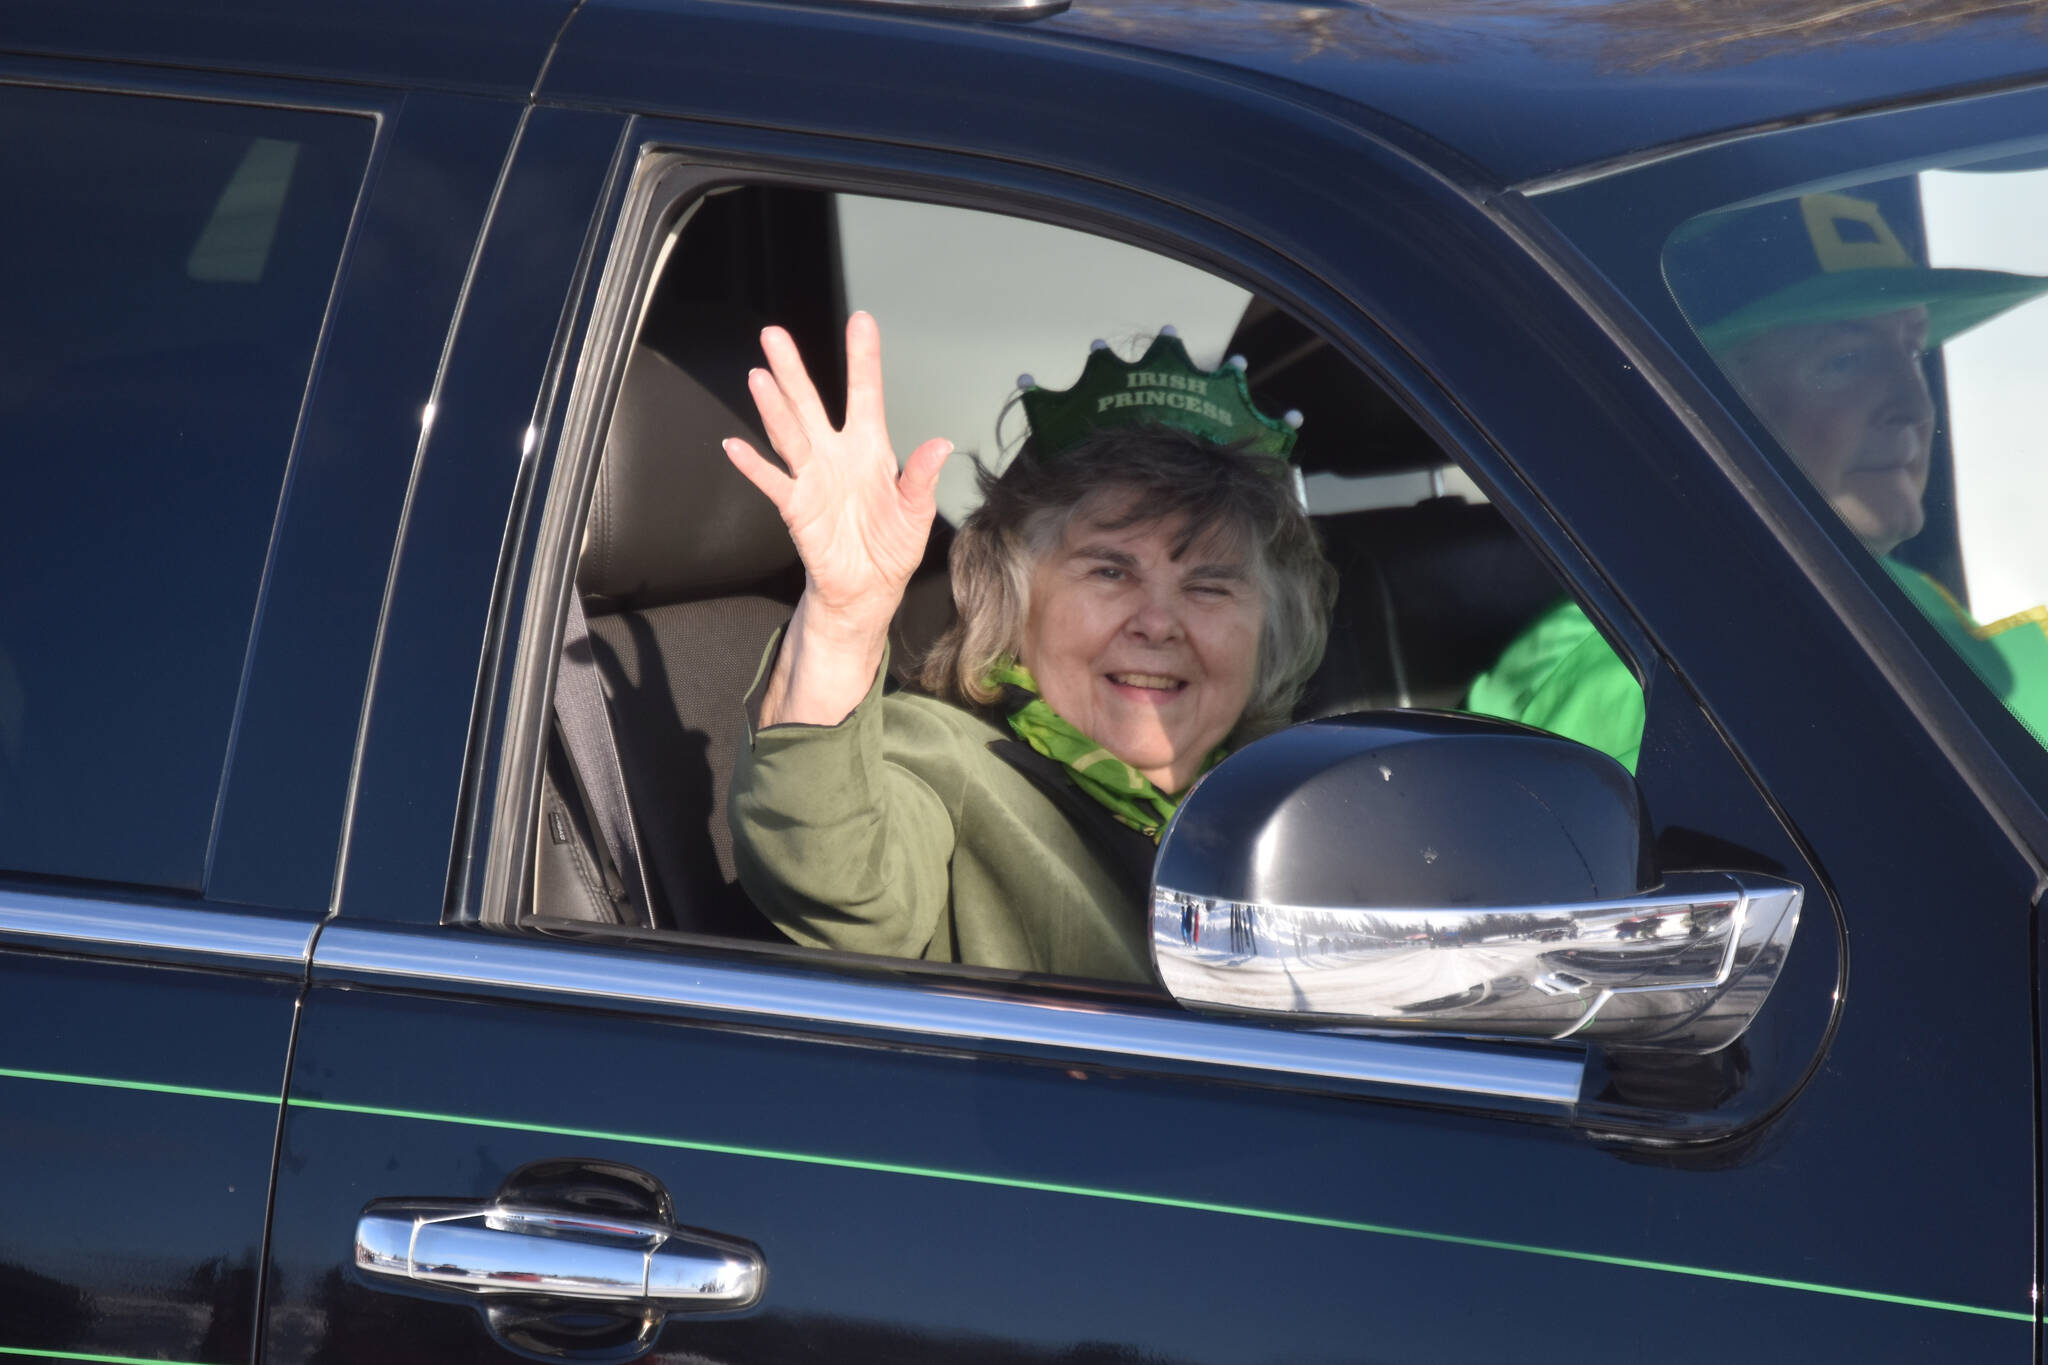 Gloria Sweeney and Mike Sweeney ride and wave as the 32nd annual Sweeney’s St. Patrick’s Day Parade proceeds down Fireweed Street in Soldotna, Alaska on Friday, March 17, 2023. (Jake Dye/Peninsula Clarion)